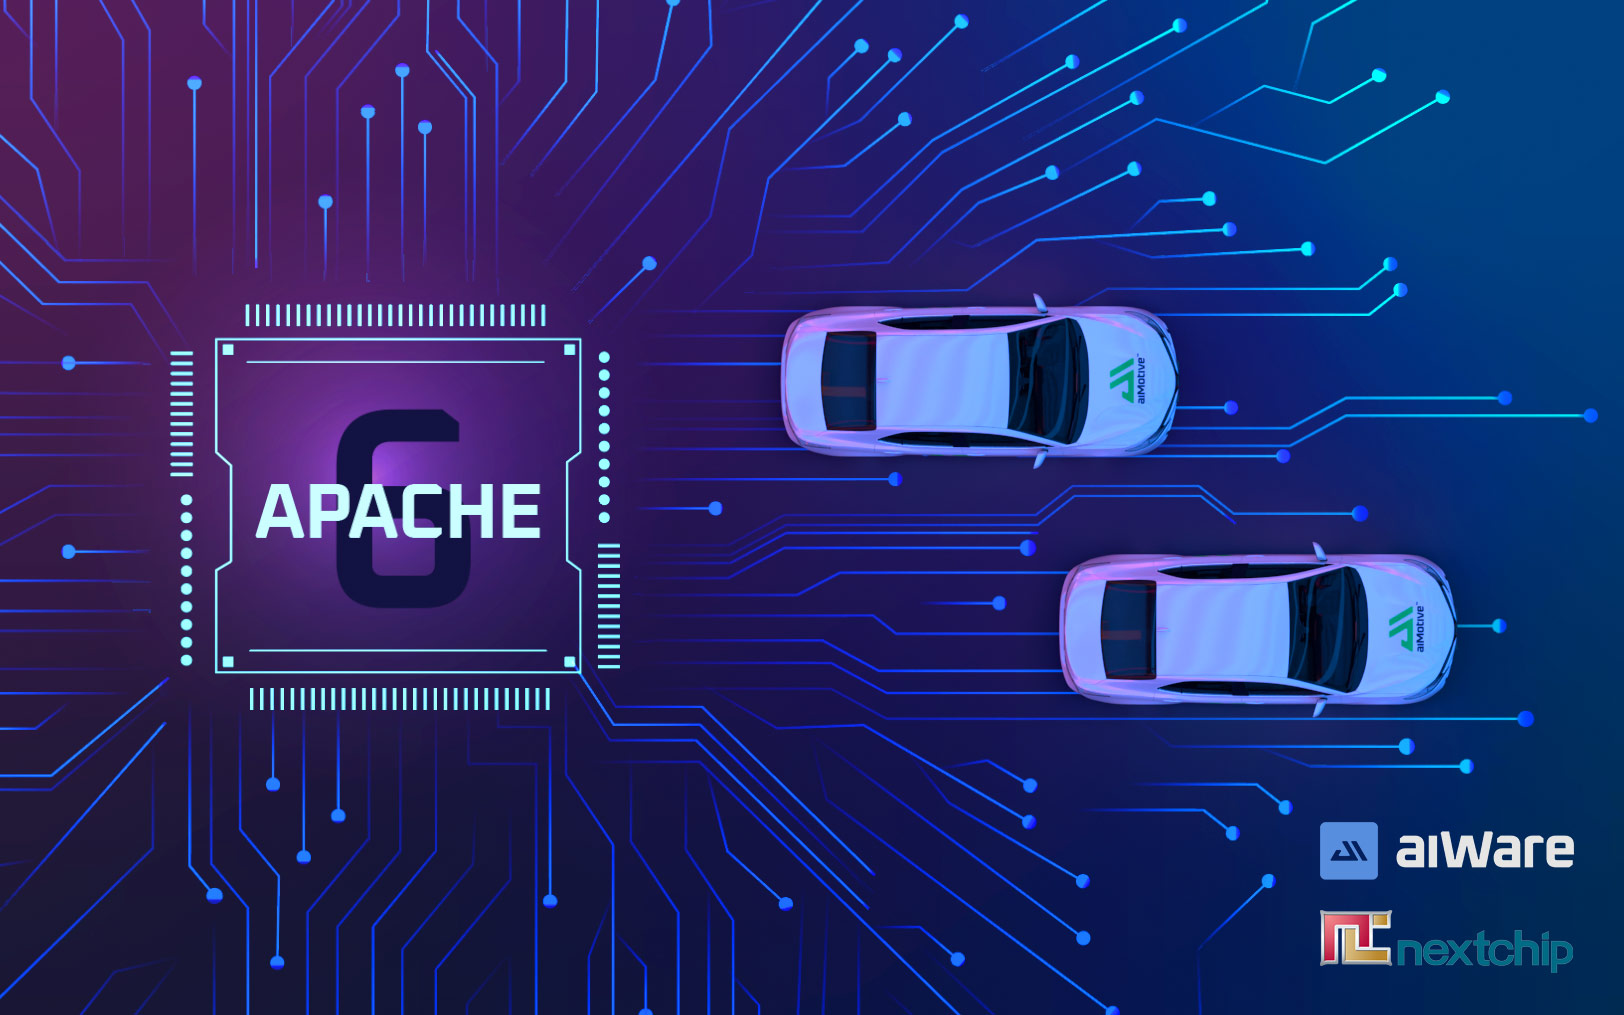 Nextchip has licensed aiMotive’s latest aiWare4™ NPU hardware IP for their next-generation ASIL-B compliant SoC for AVP and other challenging automotive applications, deepening the relationship between both companies for volume production of advanced AI-powered solutions 